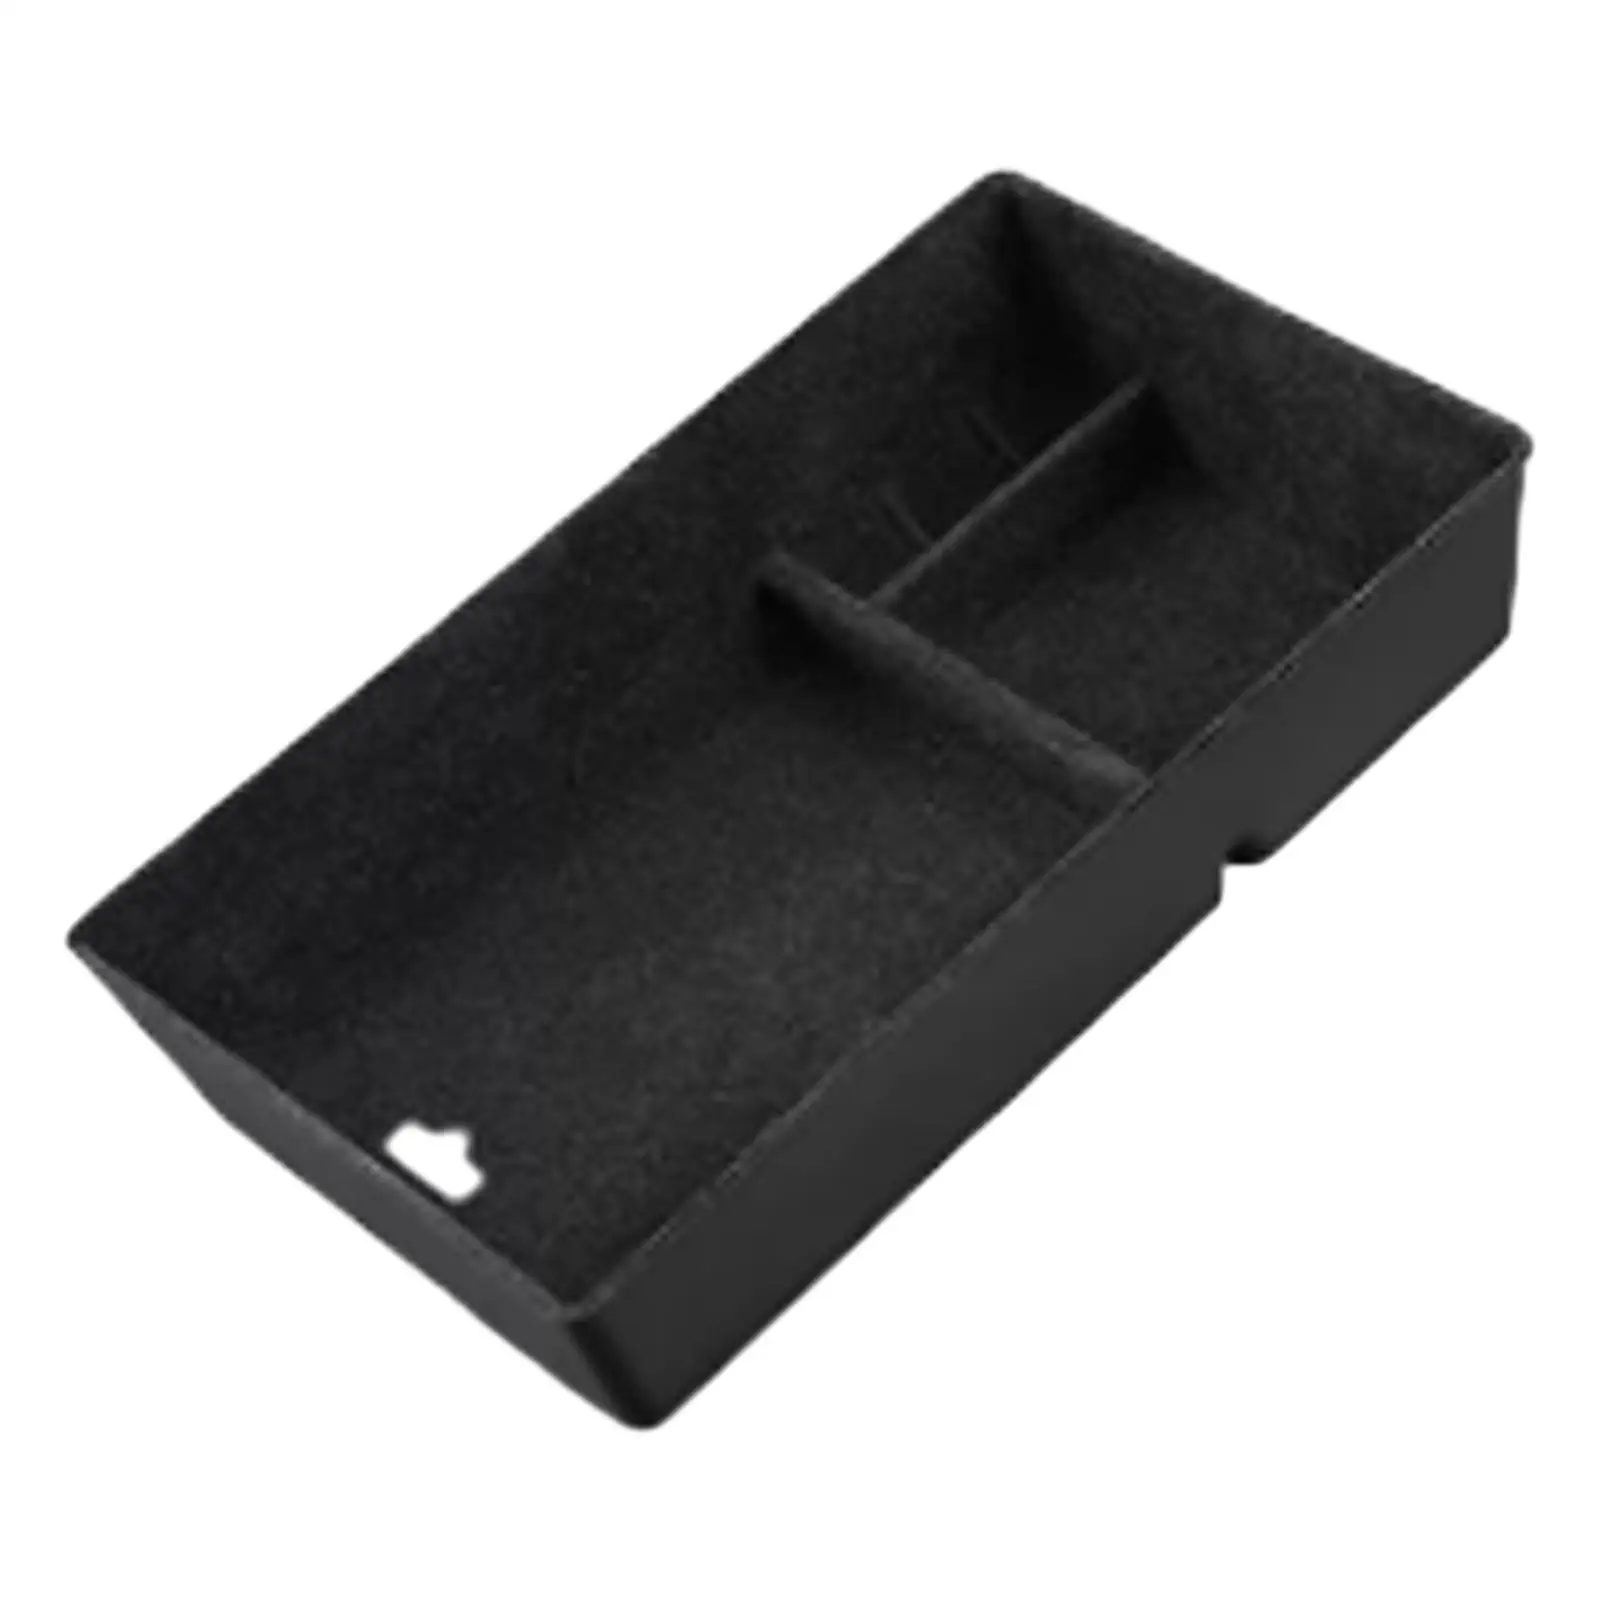 Armrest Storage Replaces Center Console Sundries Tray for Mercedes Benz